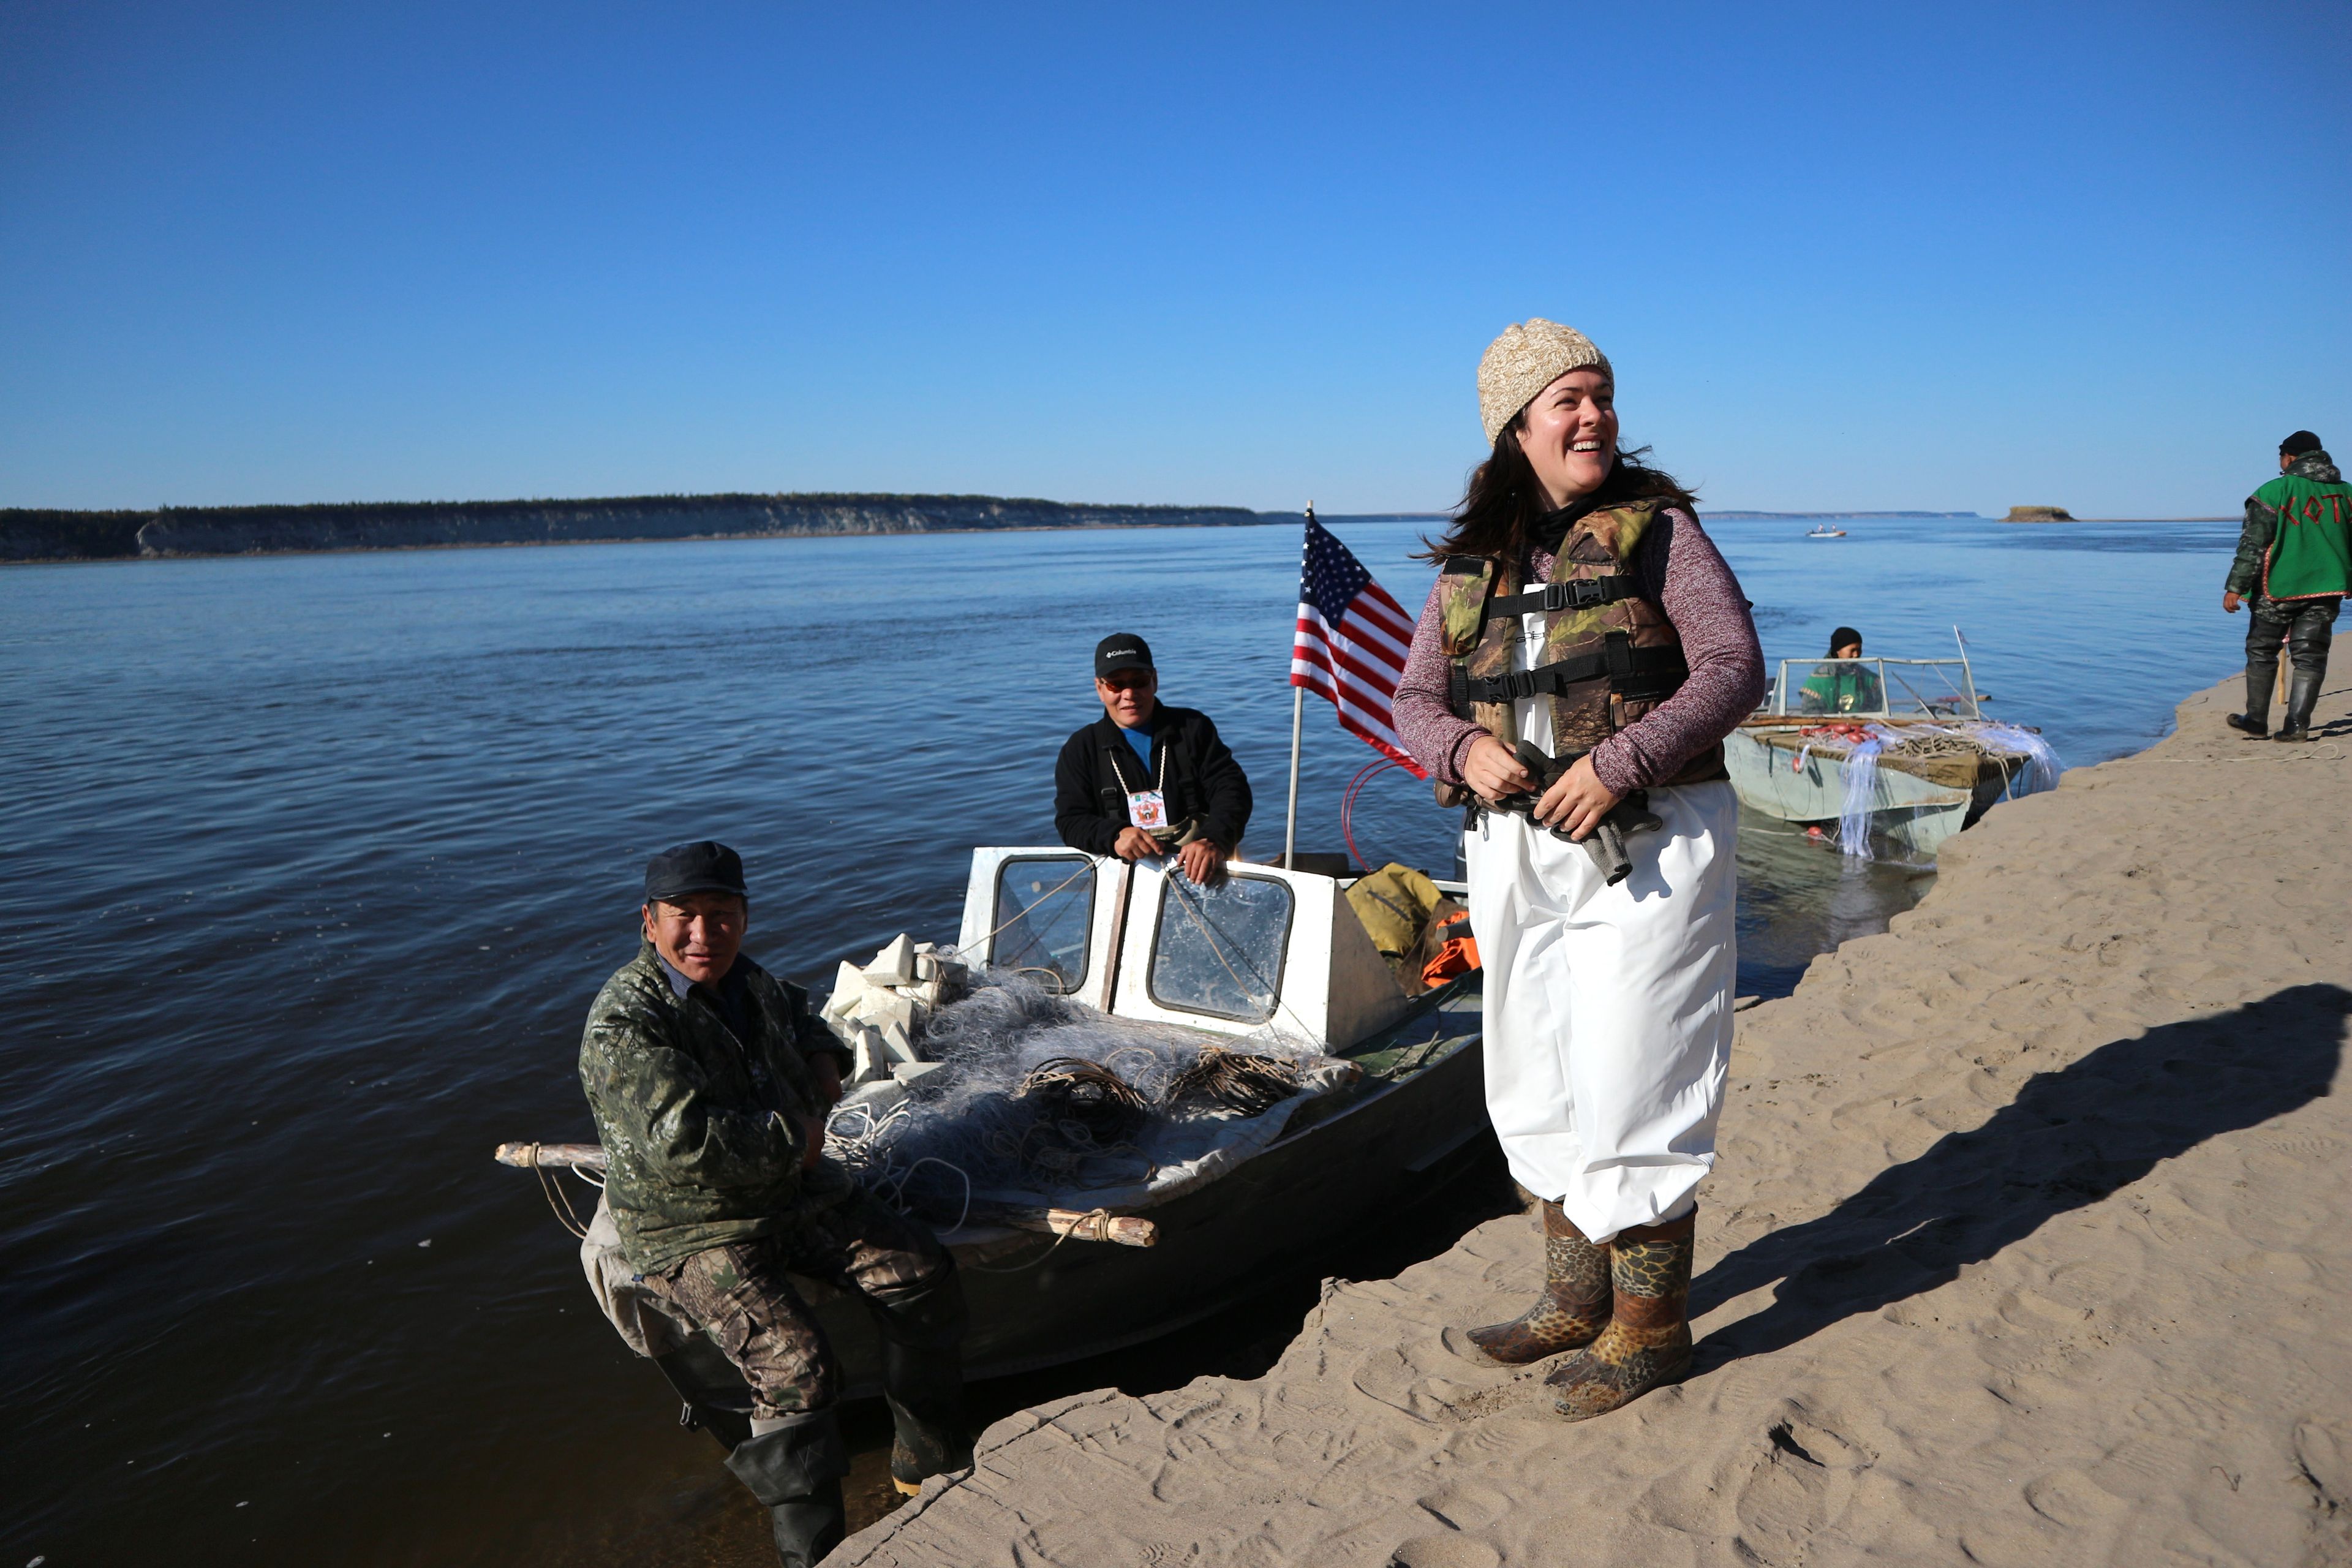 Colleen Strawhacker works with Indigenous fisherman on the Lena River.